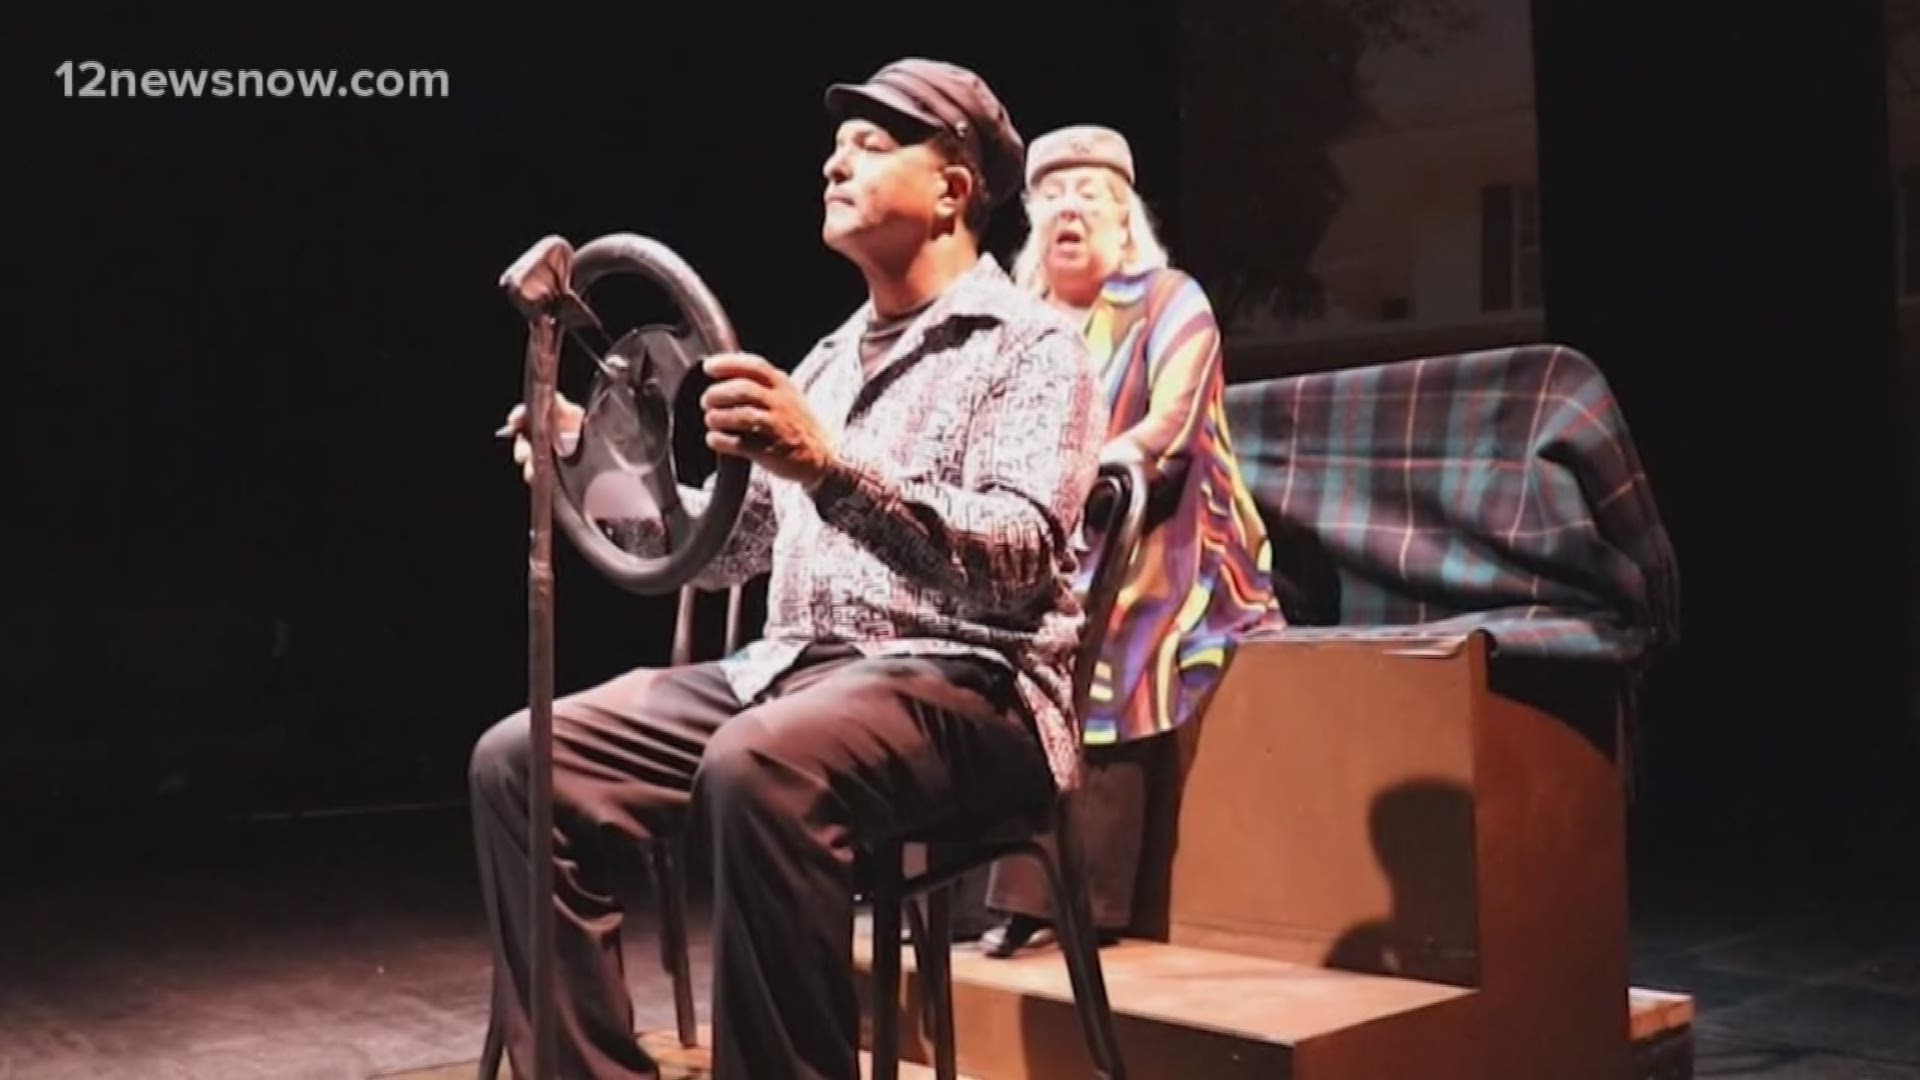 Today we're sitting down with Charlene Hudgins, who is playing Miss Daisy, in the Beaumont Community Players' production of Driving Miss Daisy.